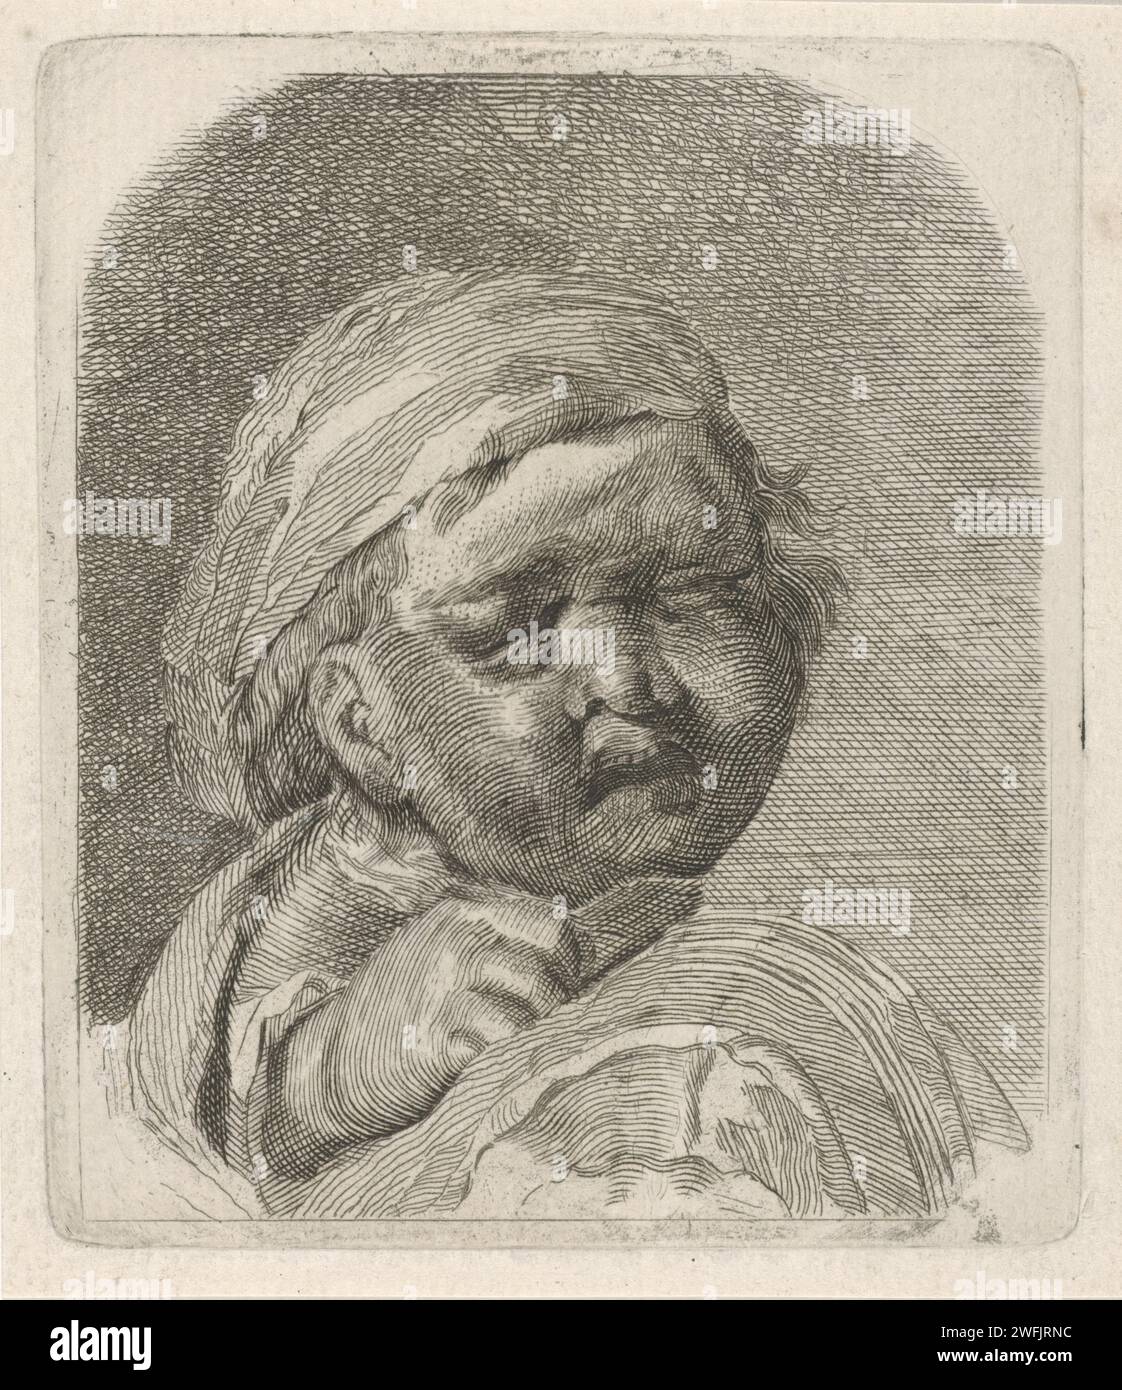 Crying Child, Pieter de Mare, 1768 - 1796 print  Leiden paper etching / engraving child (+ being sad, suffering, sorrowing) Stock Photo